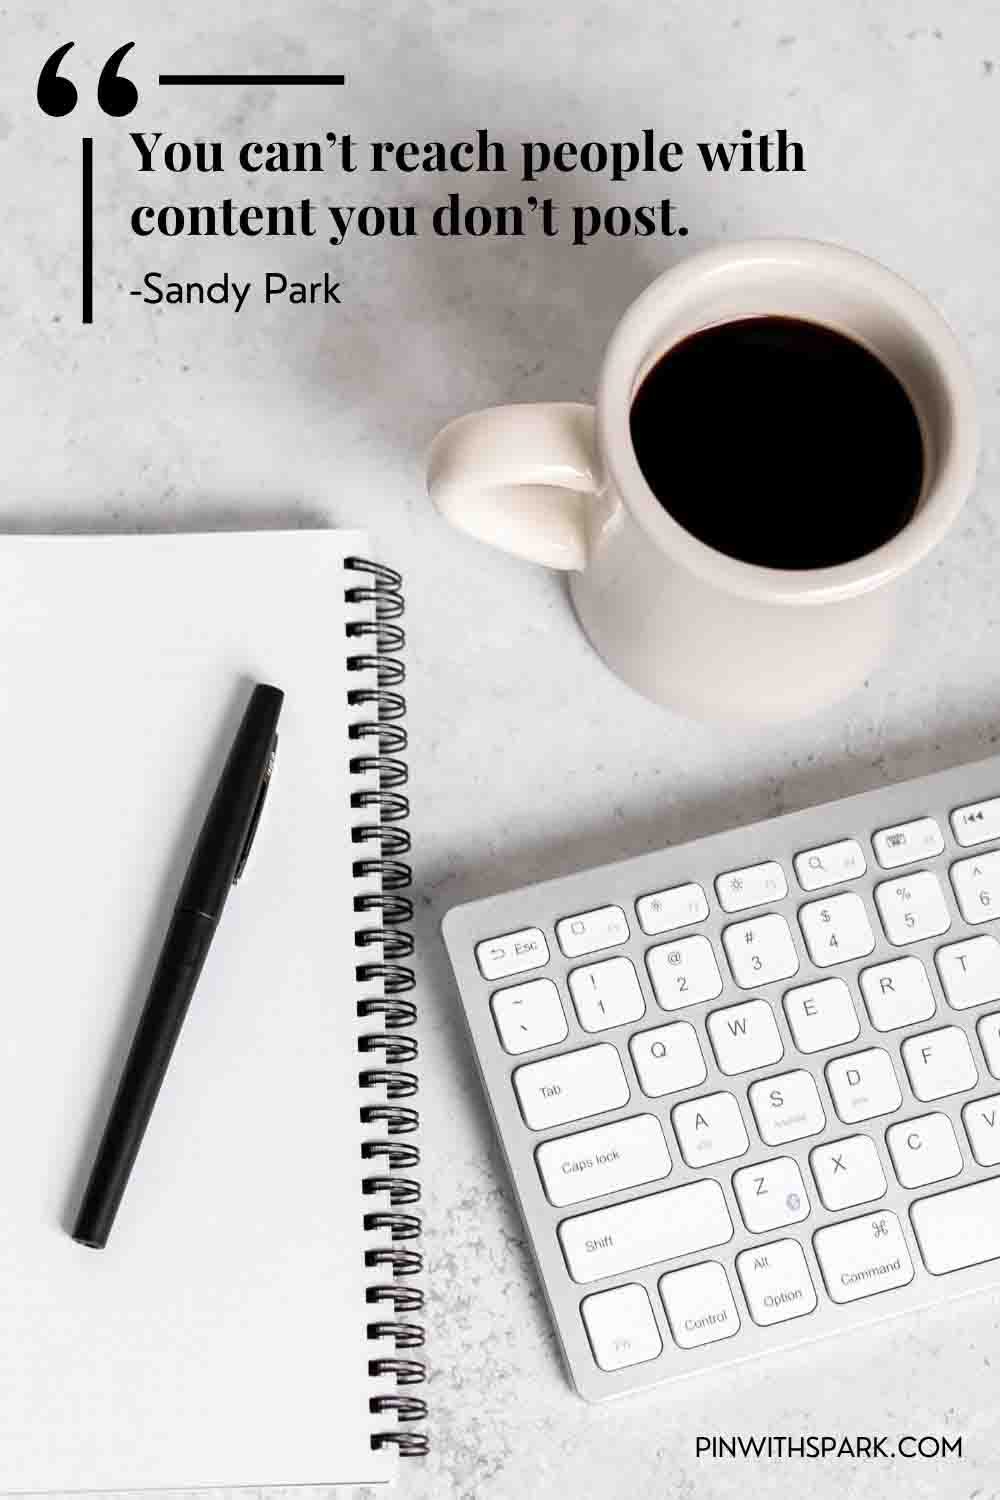 open notebook and keyboard on top of tabletop with quote "you can't reach people with content you don't post" by Sandy Park Pin with SPARK Pinterest for business